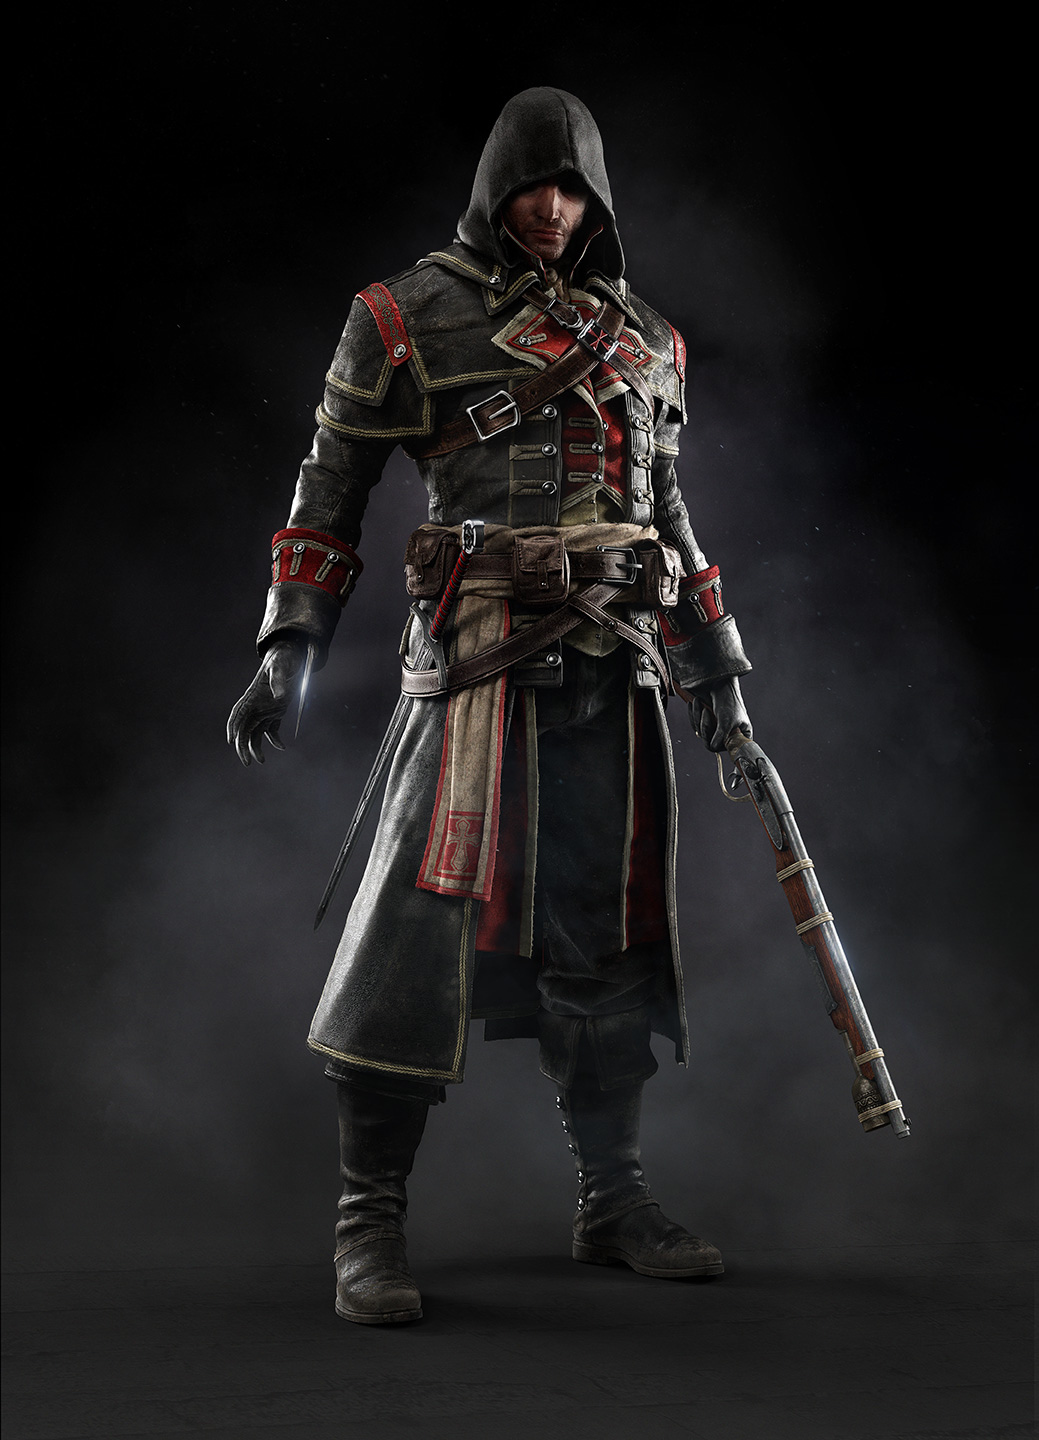 AssassinS Creed Rogue 1 Background   Trendy Wallpapers